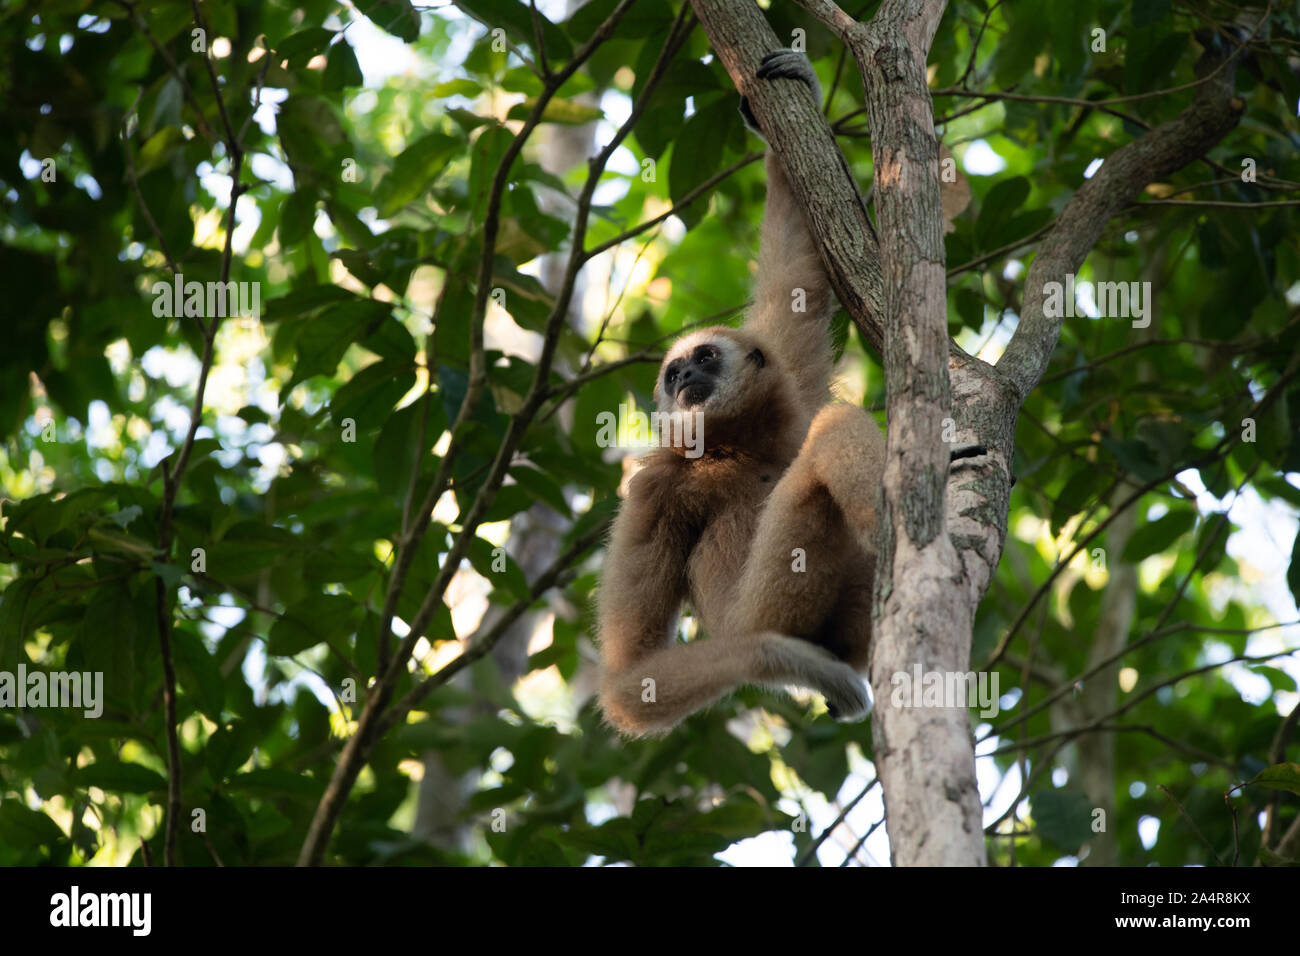 The lar gibbon (Hylobates lar), also known as the white-handed gibbon, is an endangered primate in the gibbon family, Hylobatidae. Stock Photo